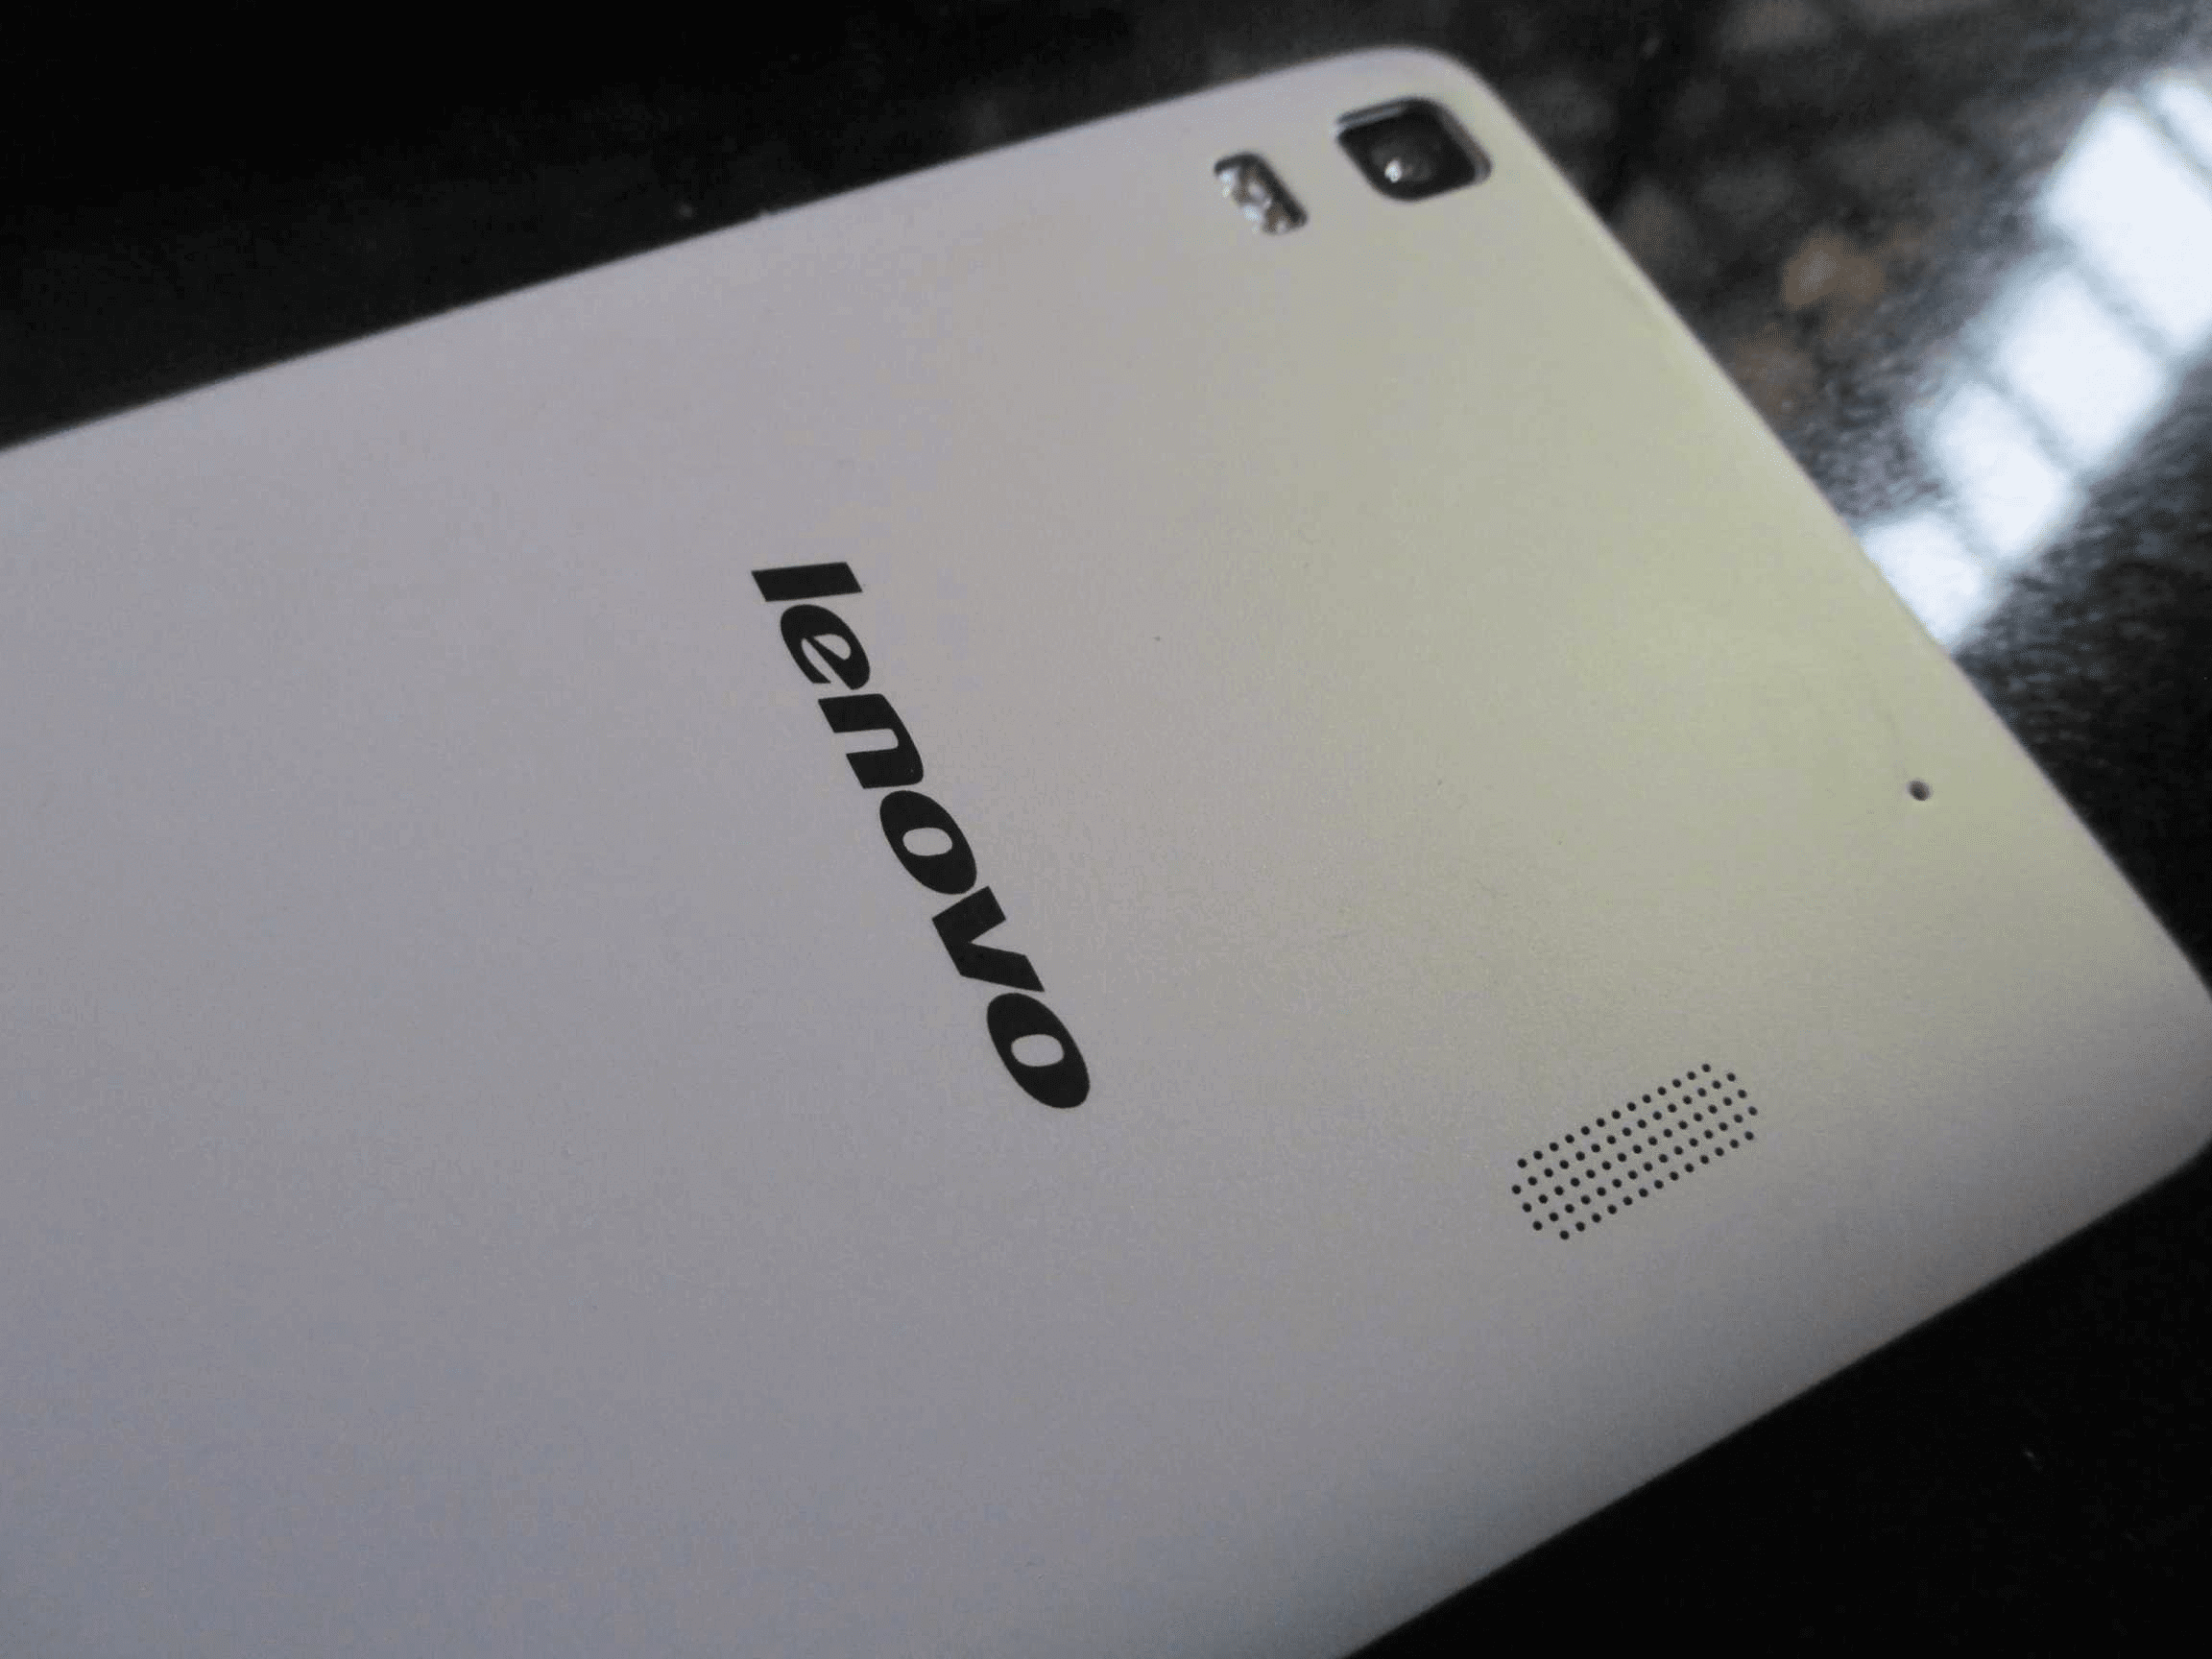 Lenovo K3 Note updated Android 8.0 Oreo Lineage OS 15 ROM